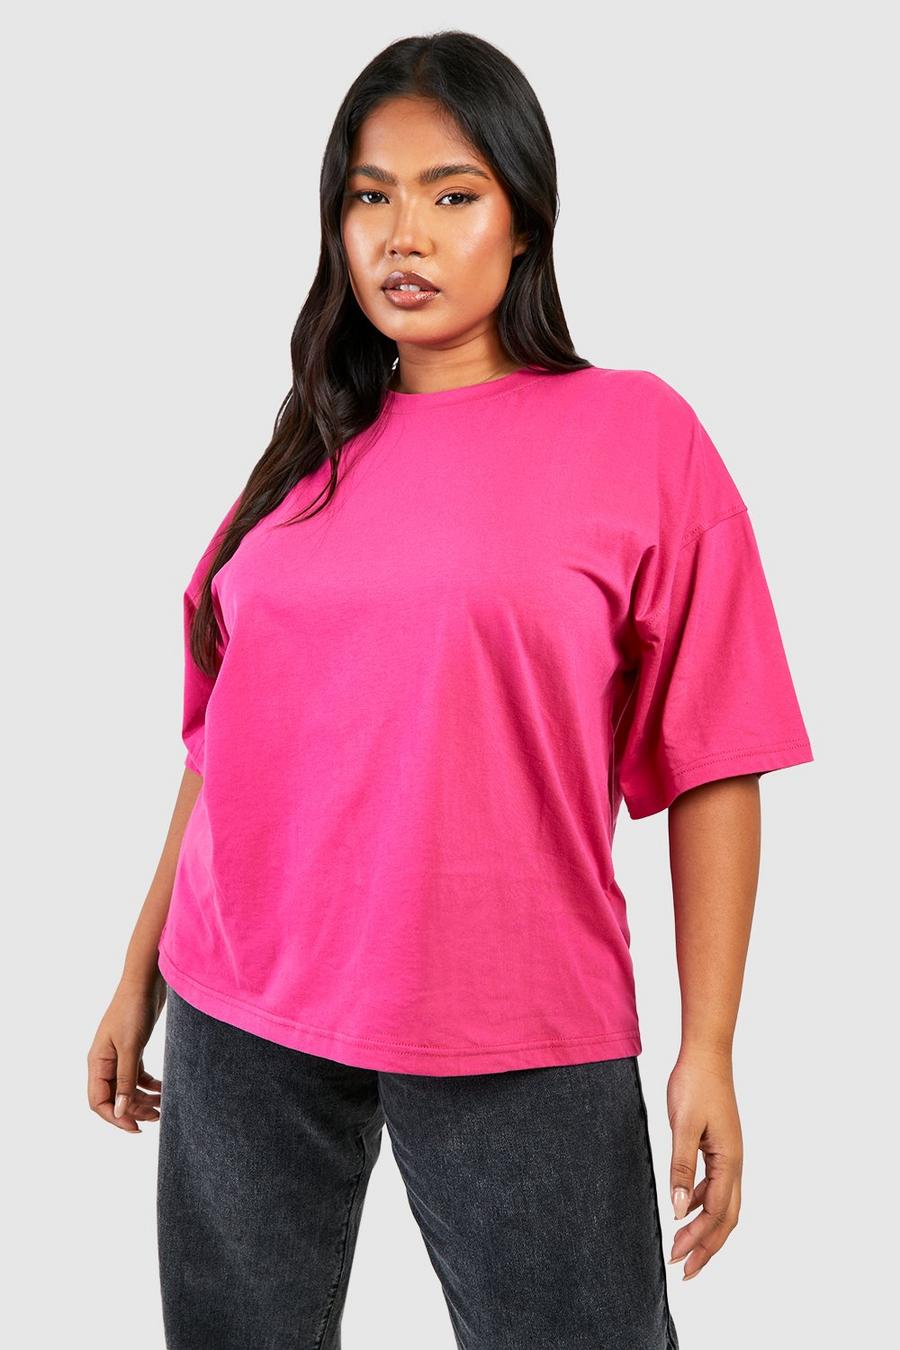 T-shirt Plus Size oversize Basic a girocollo in cotone Brights, Hot pink